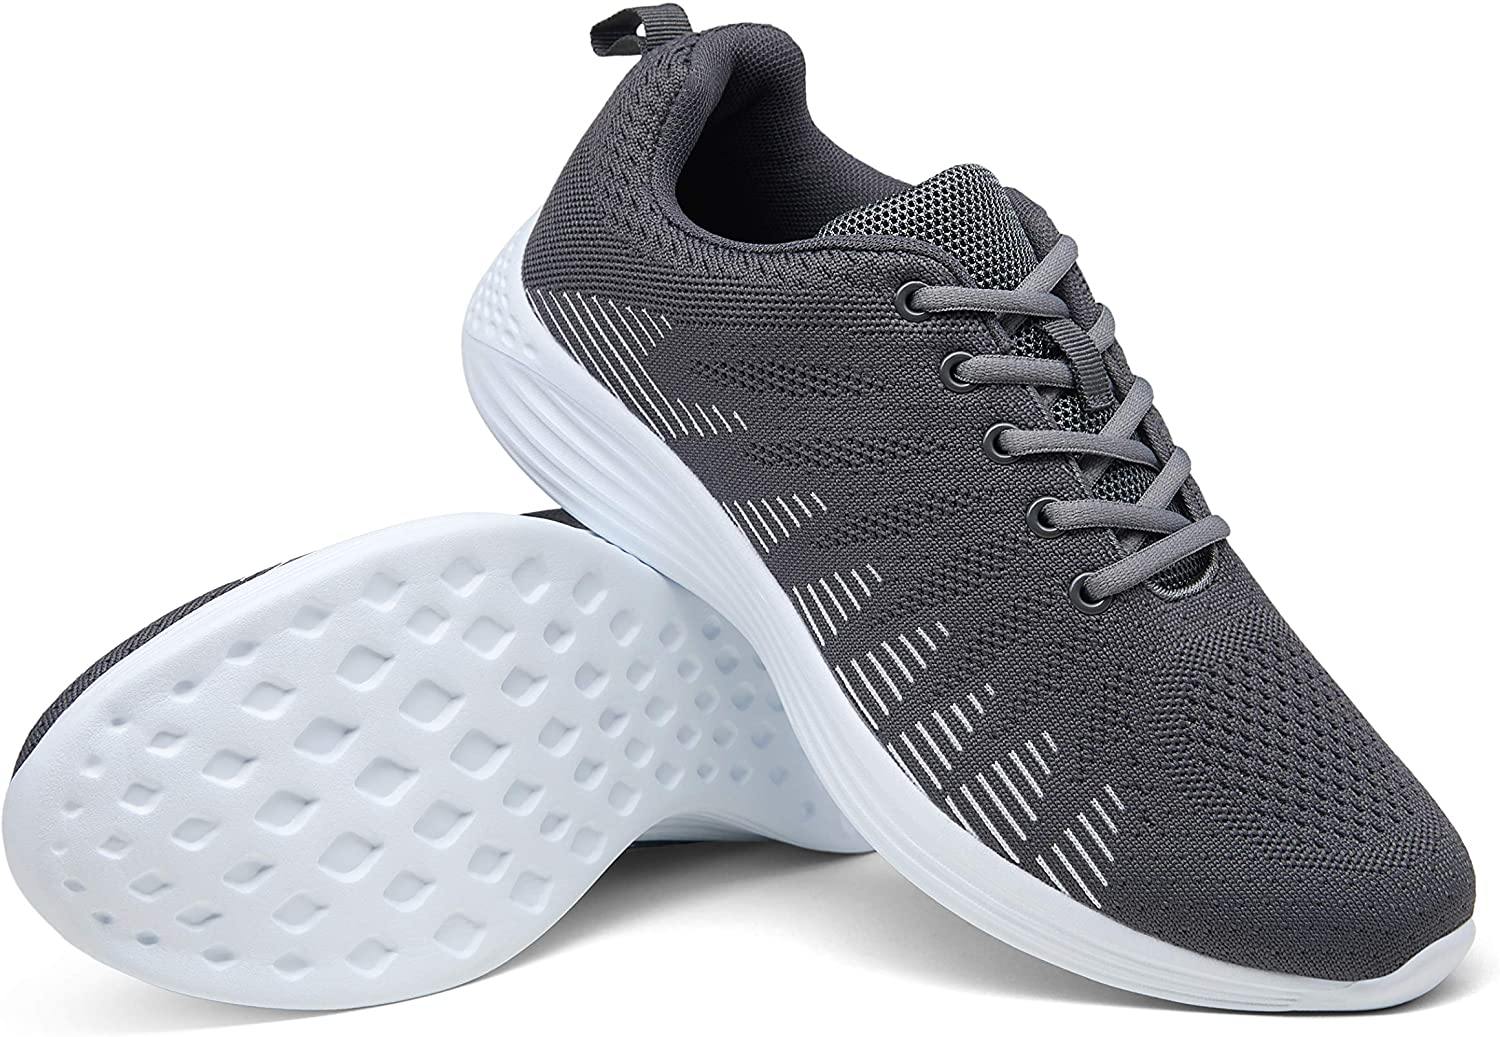 JOUSEN GREY KNITTED FABRIC RUNNING SHOES